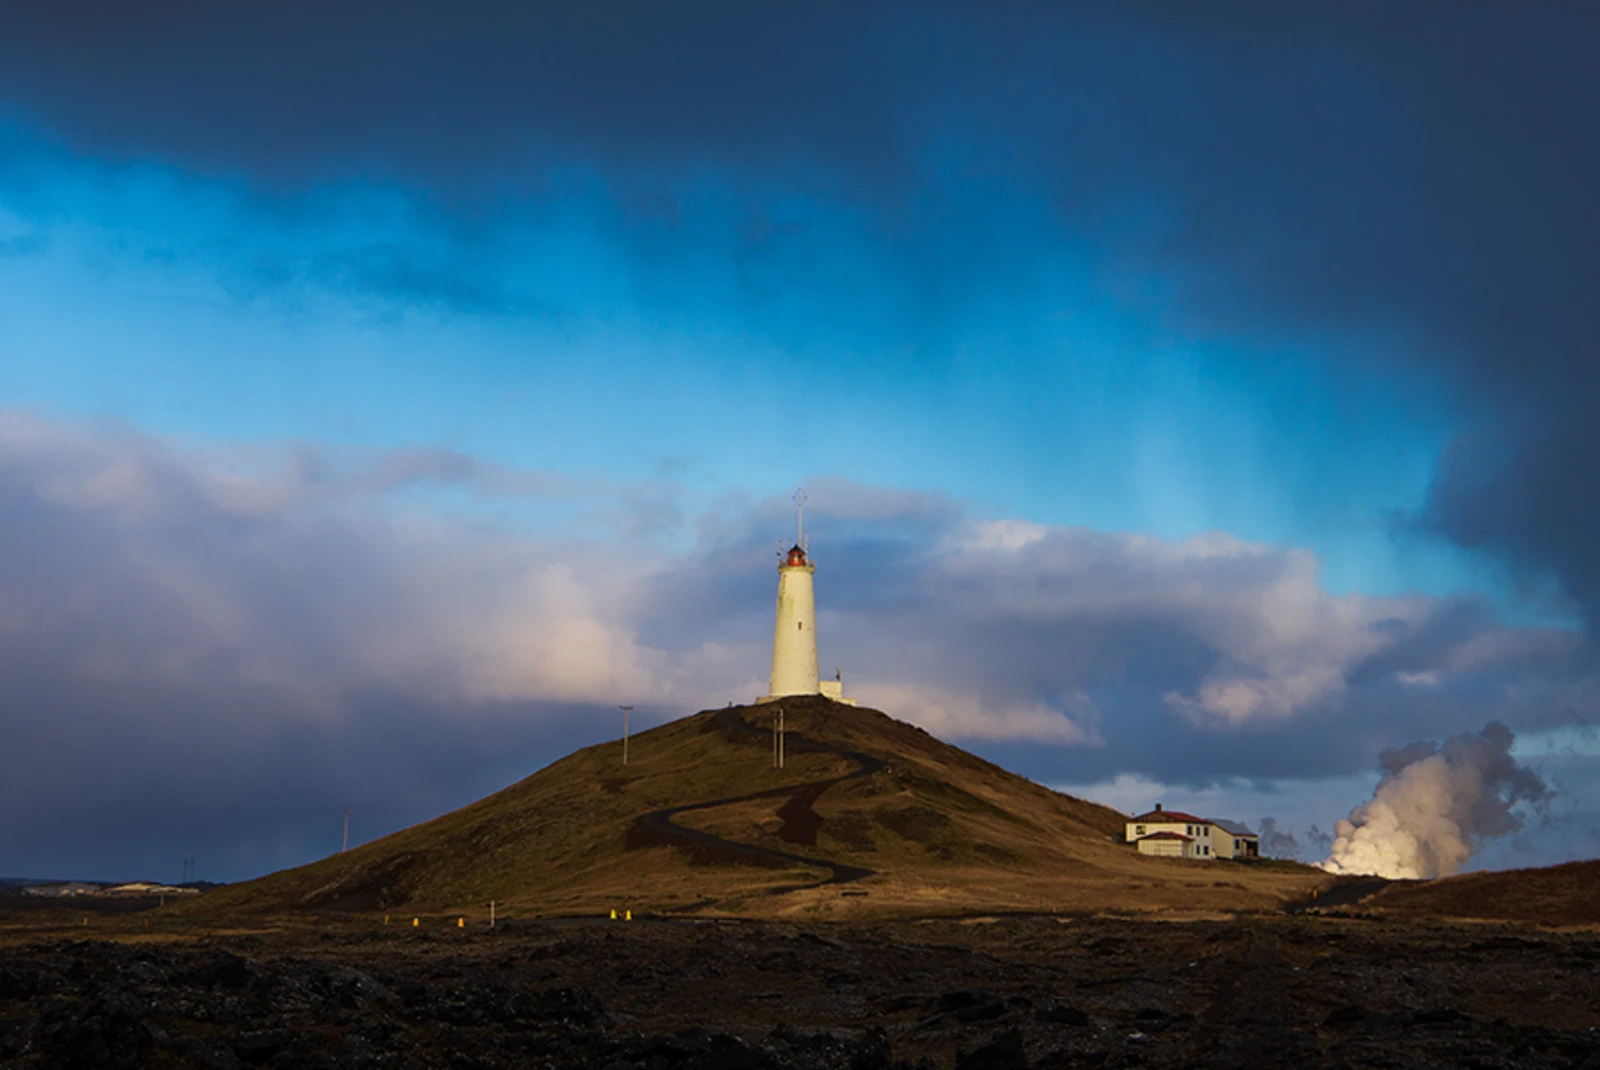 5-Day Itinerary to Explore Iceland’s Natural Beauty - Day 2: Check out the Reykjanes Peninsula